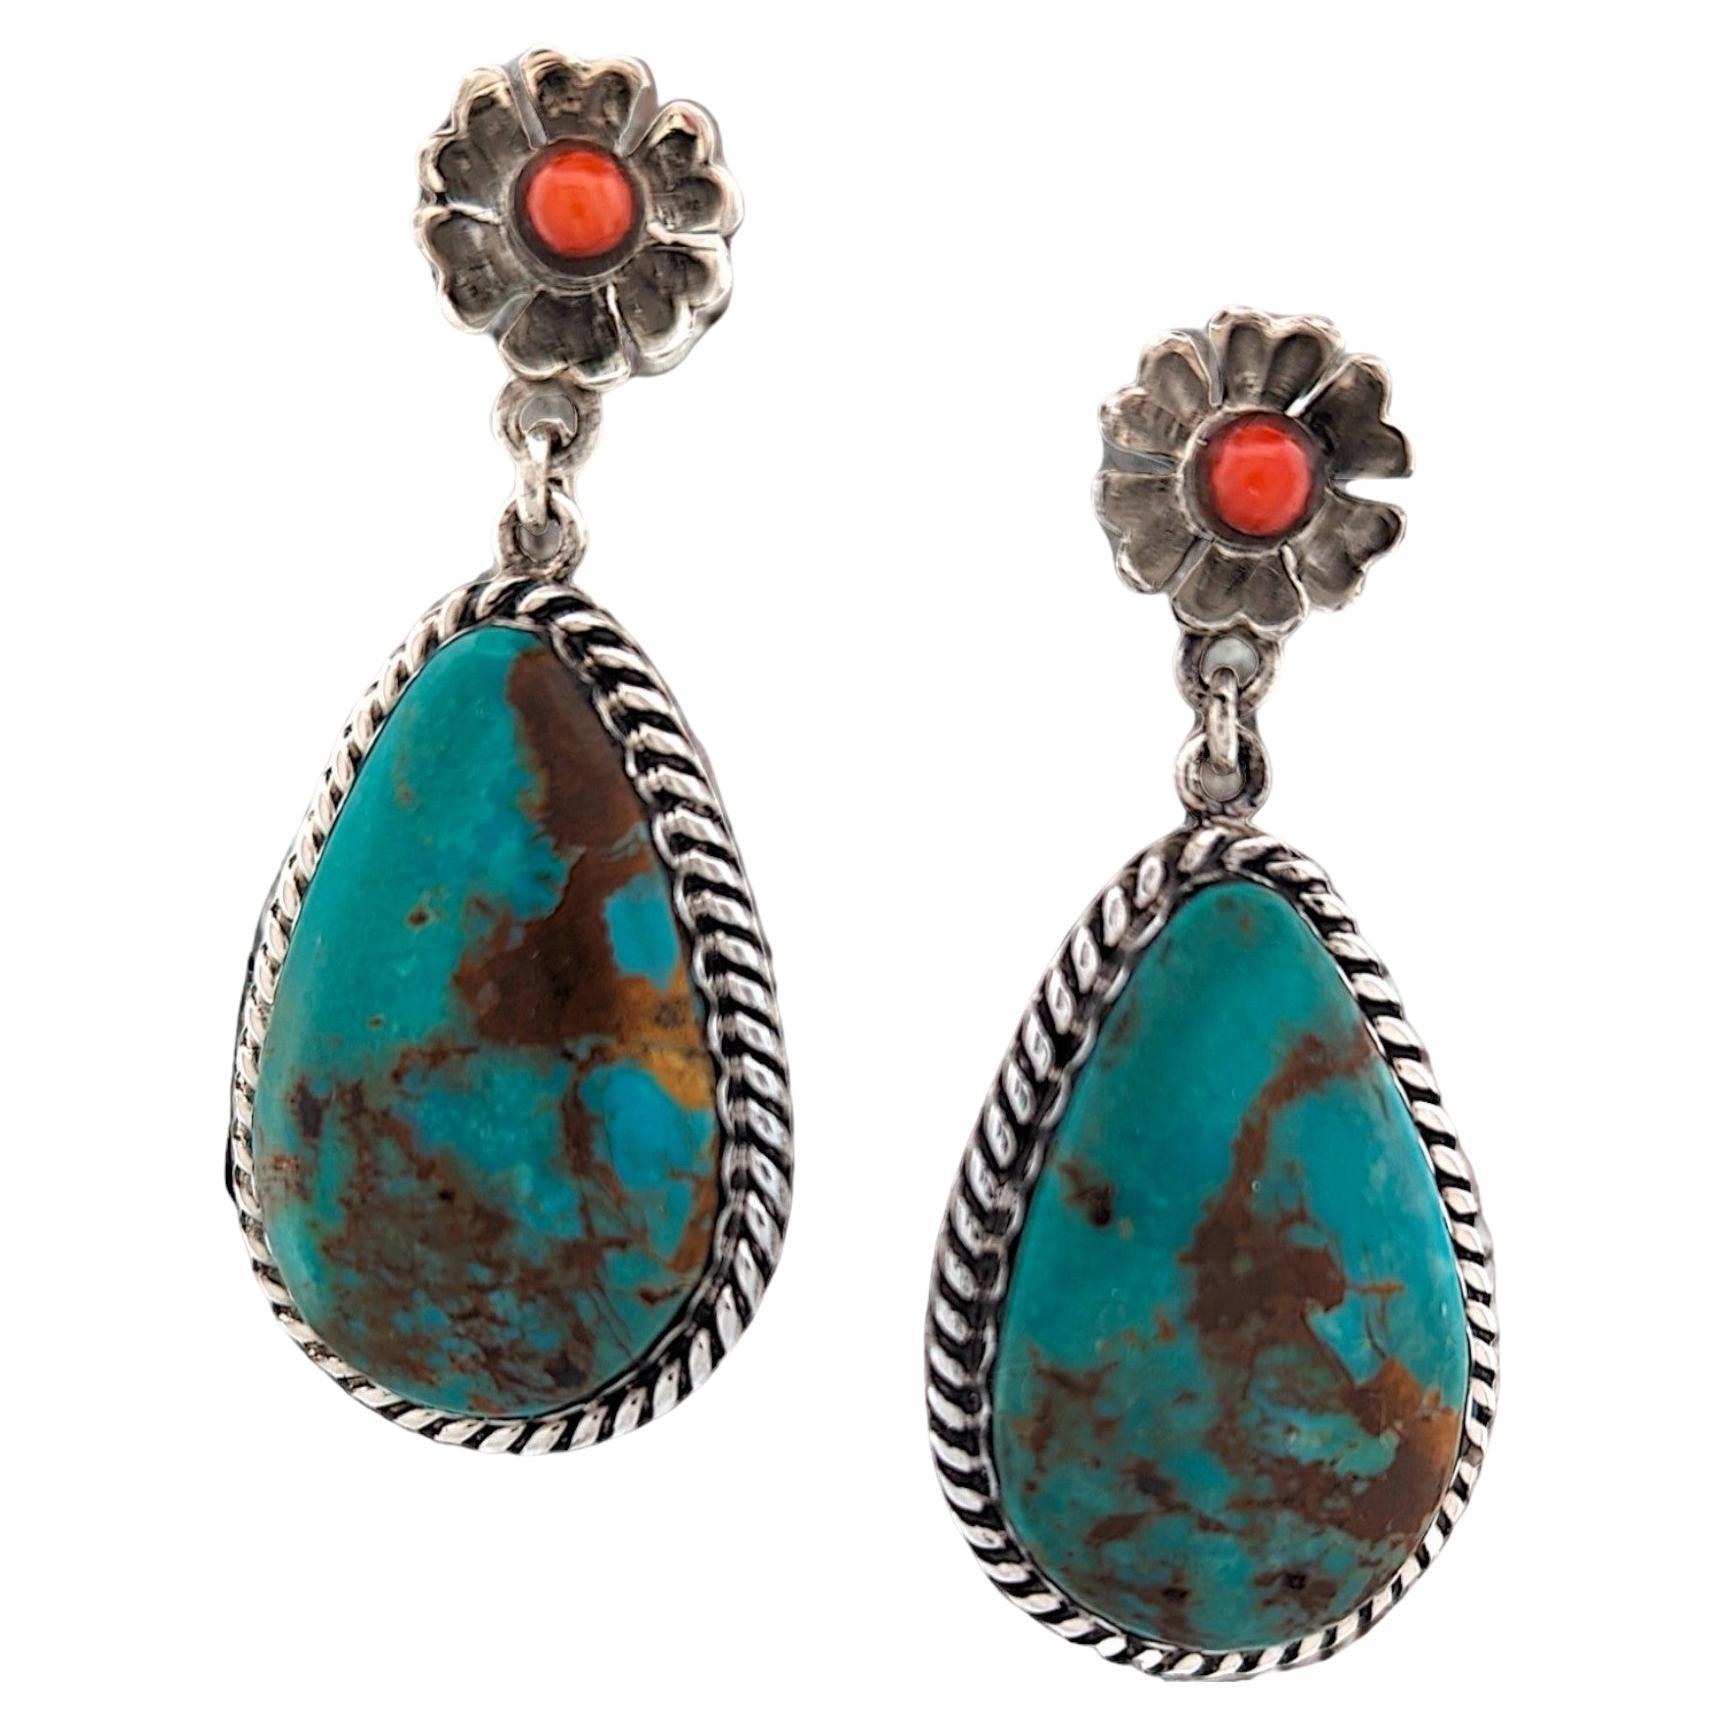 Handcrafted Sterling silver earrings featuring authentic Kingman Turquoise